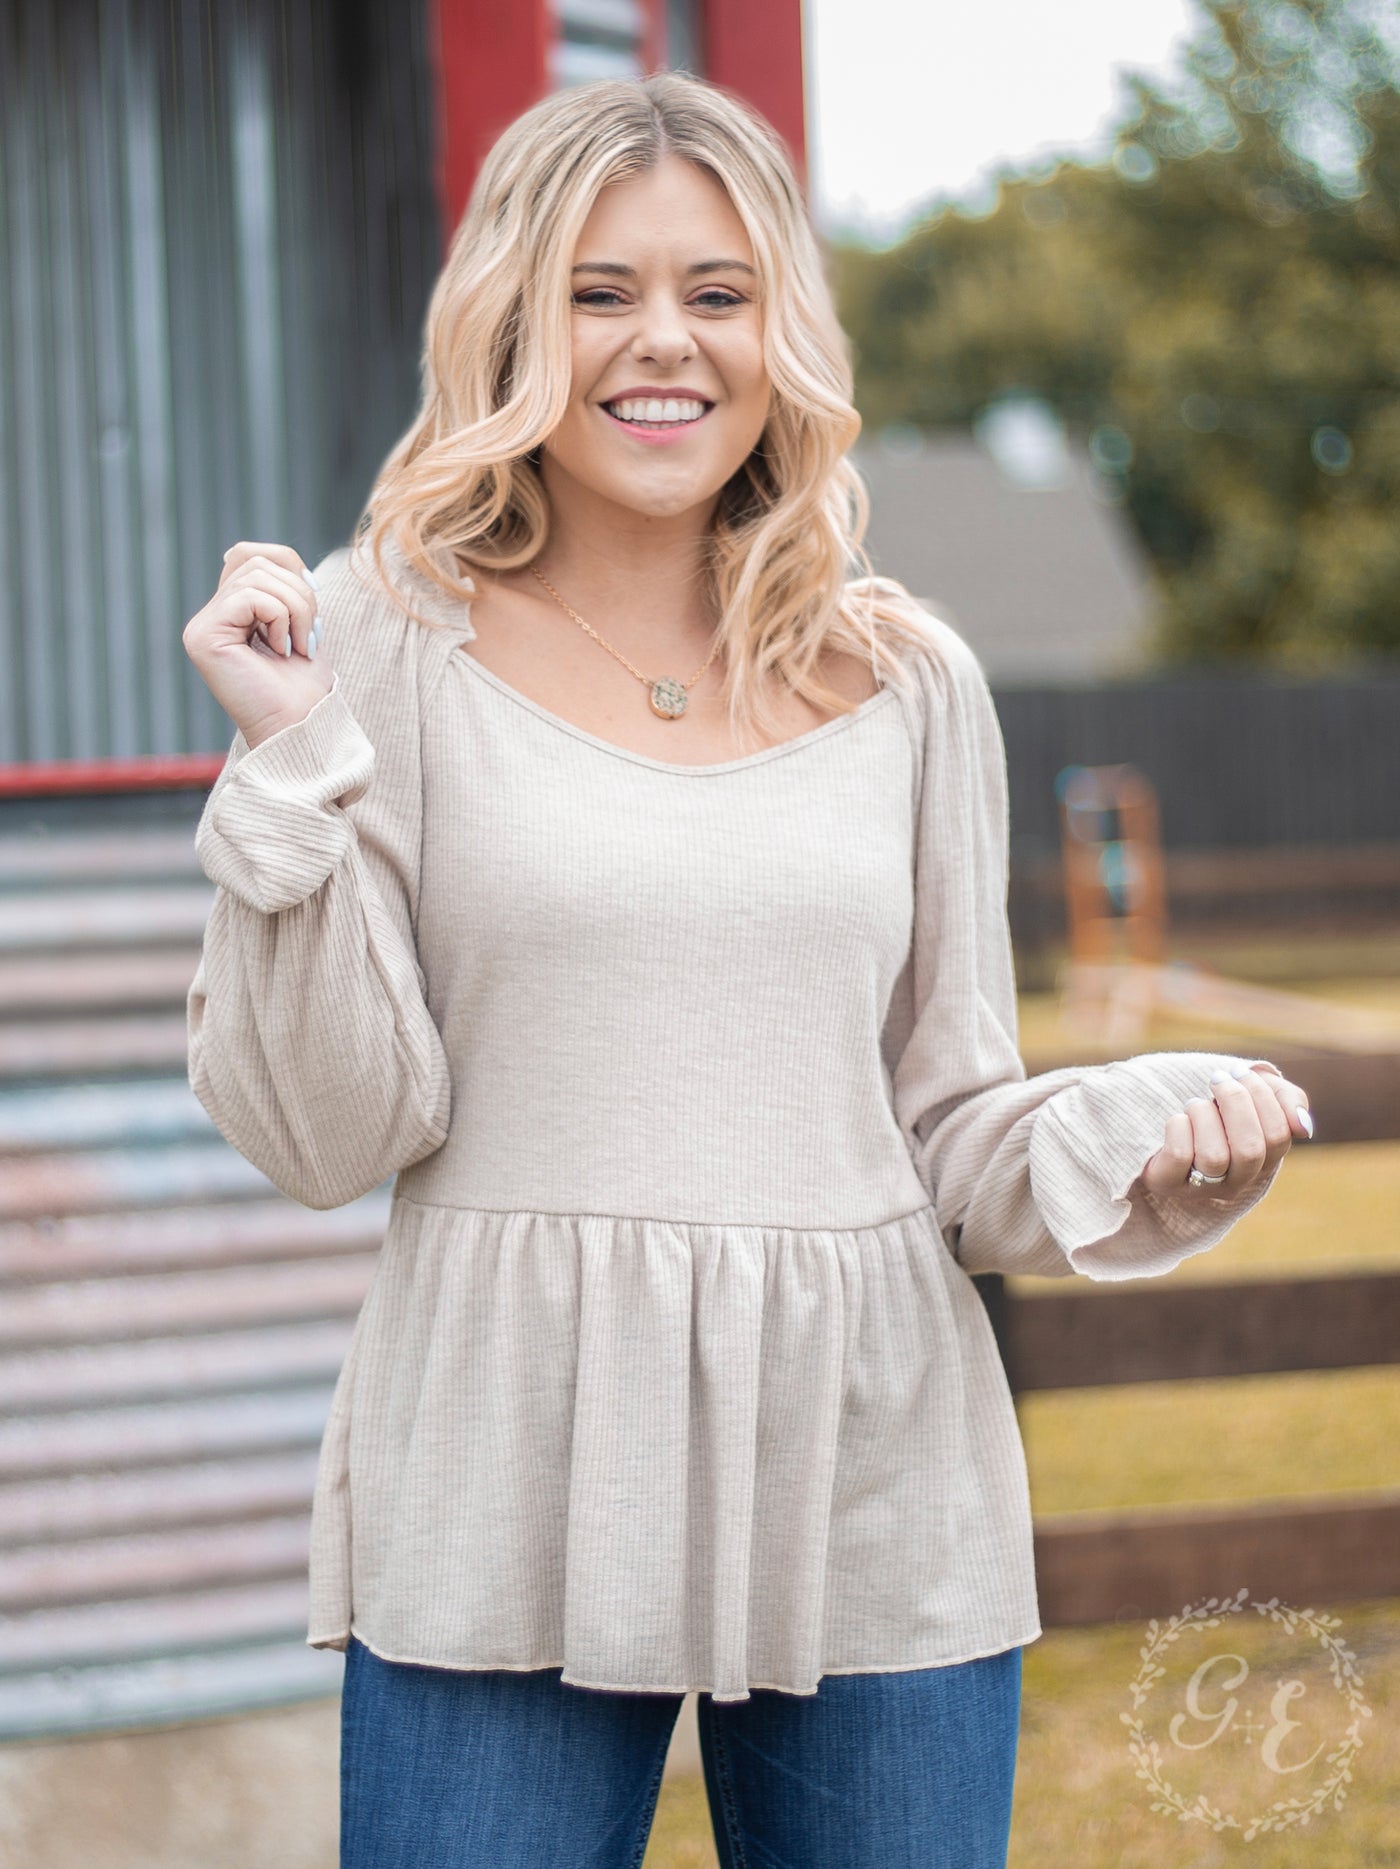 How 'Bout Those Ruffles Long Sleeve With Neck Line Ruffles, Beige